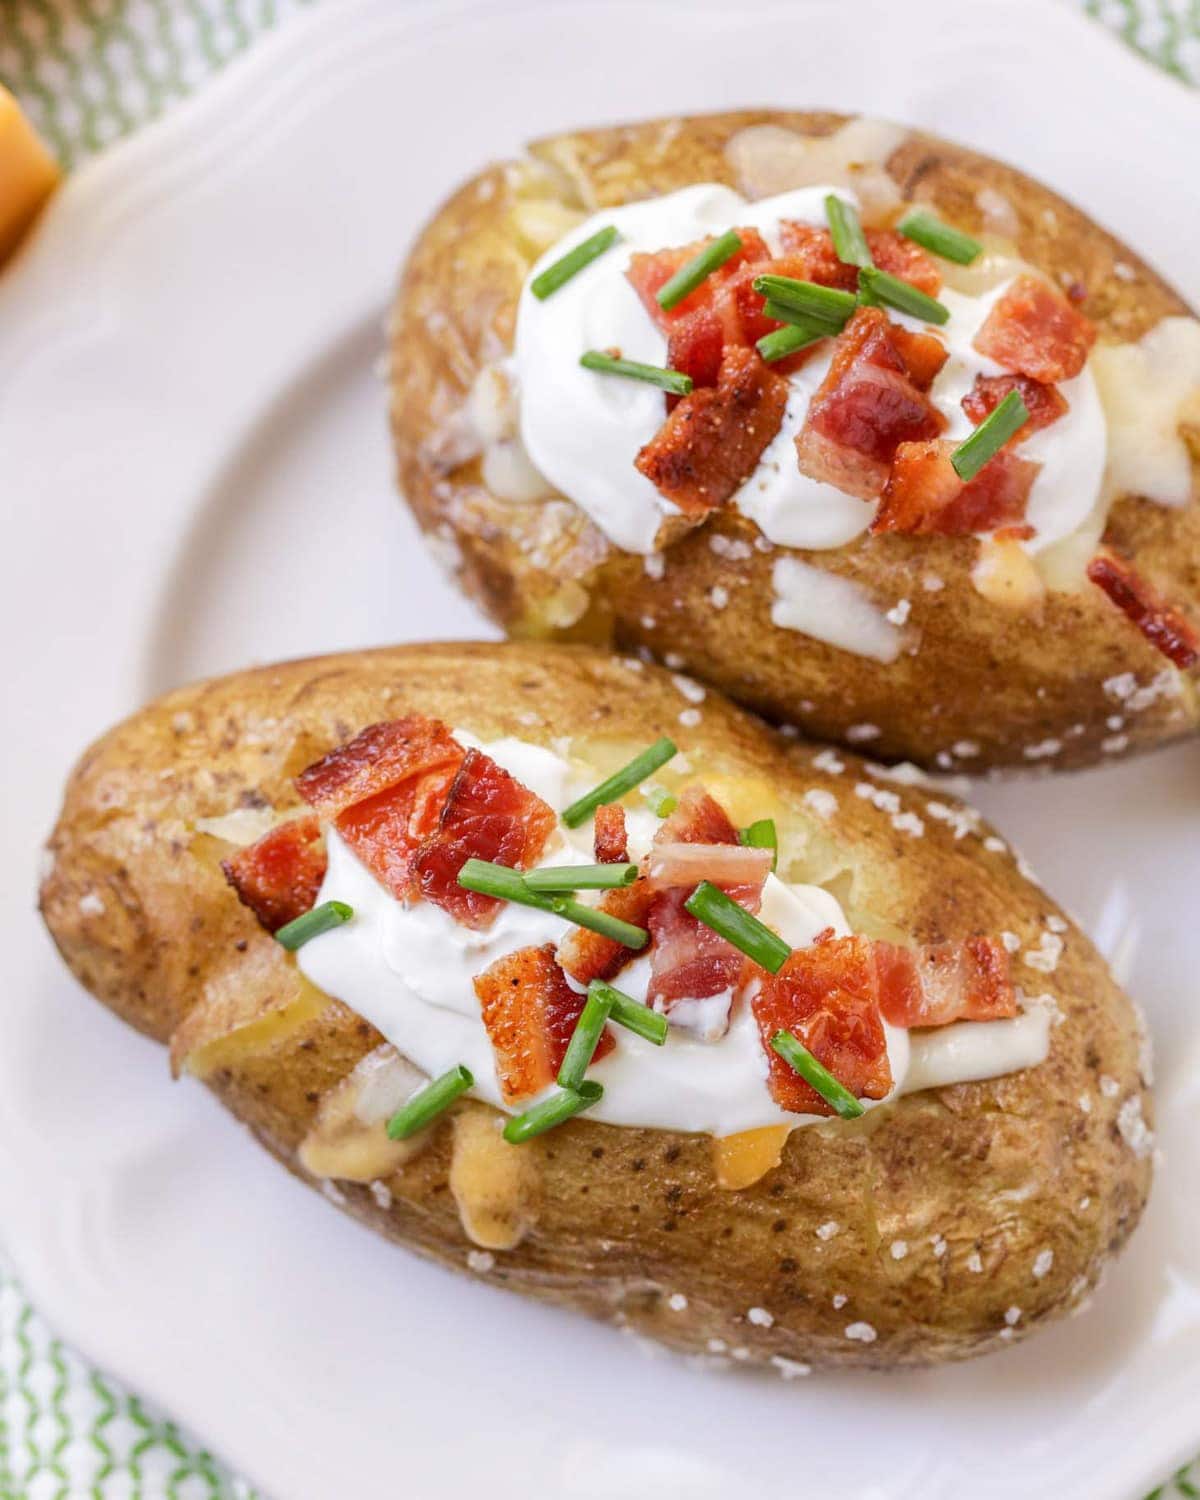 A perfect baked potato topped with sour cream and bacon.